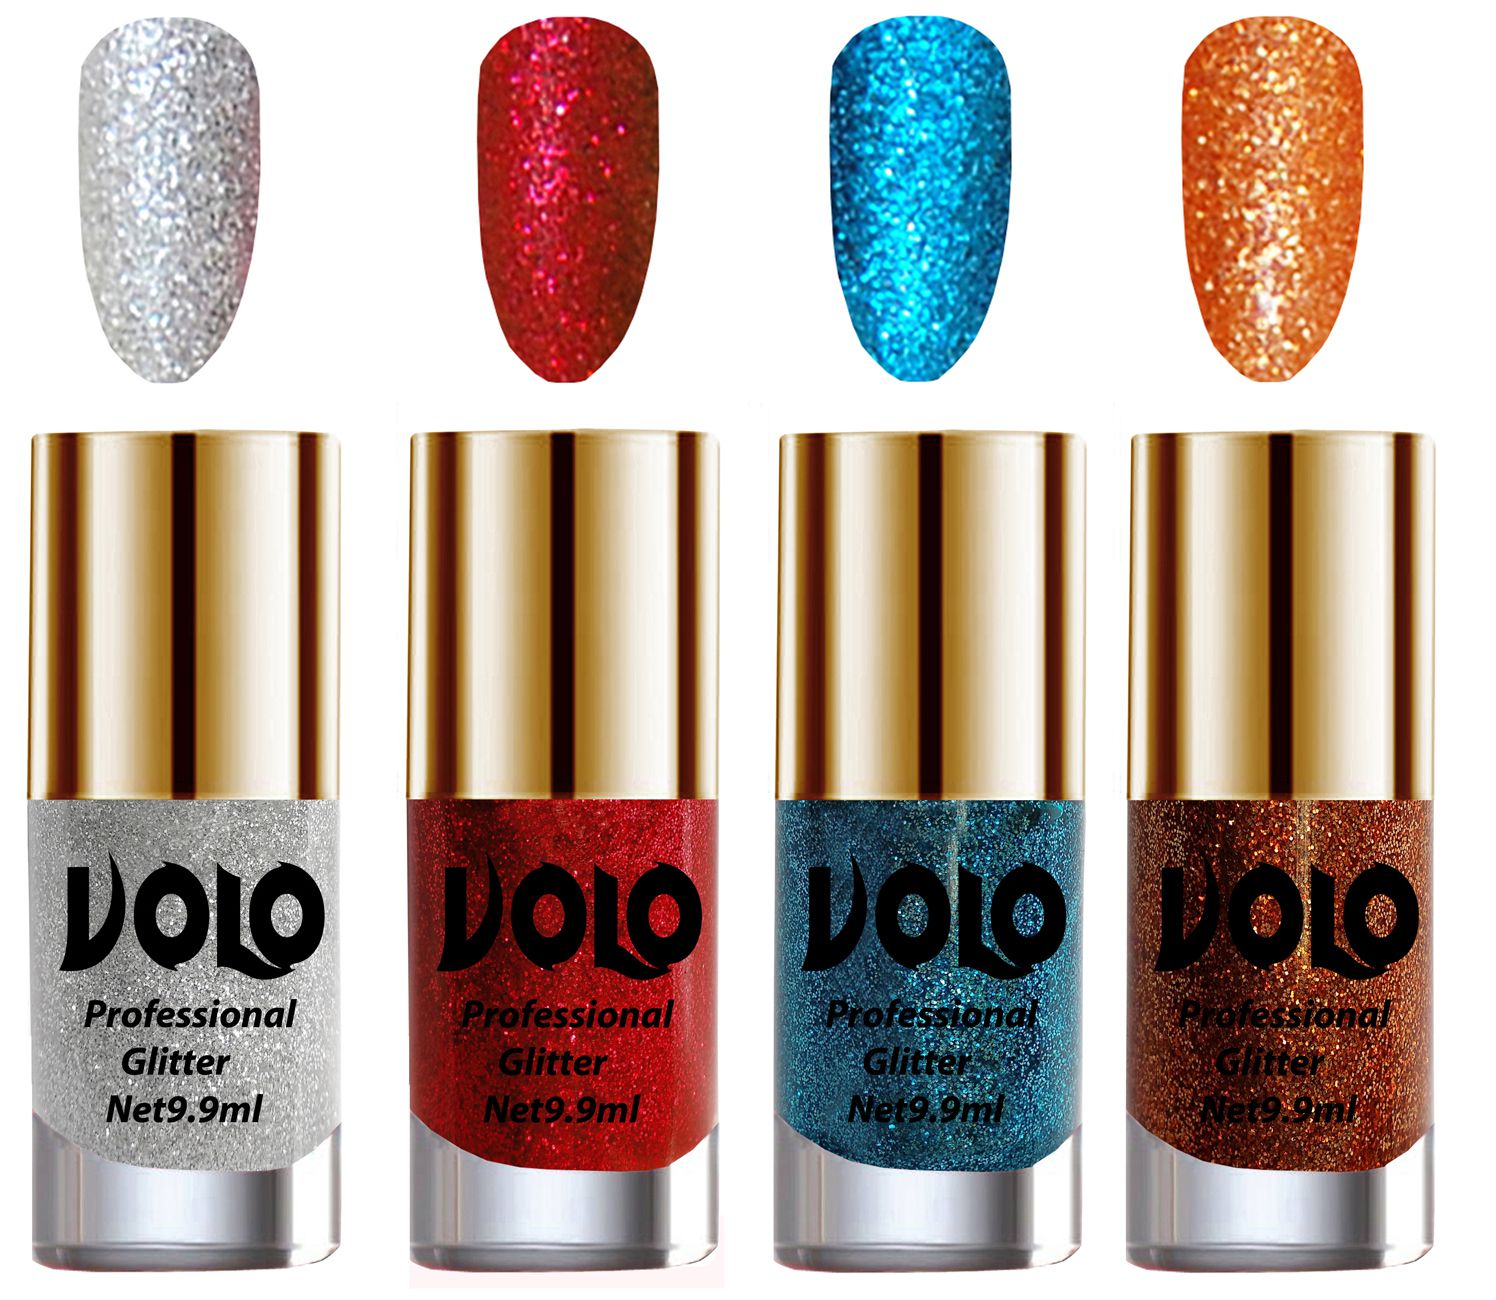     			VOLO Professionally Used Glitter Shine Nail Polish Silver,Red,Blue Orange Pack of 4 39 mL